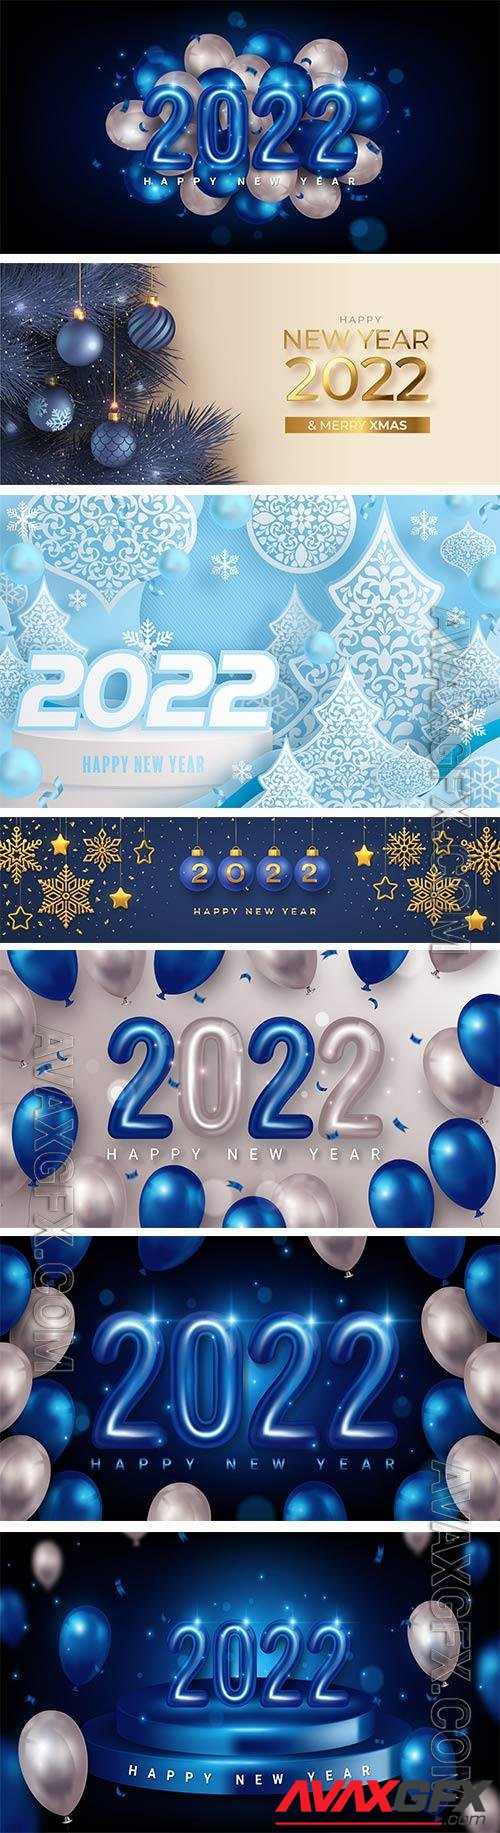 2022 number made by sparkle lights with golden happy new year concept